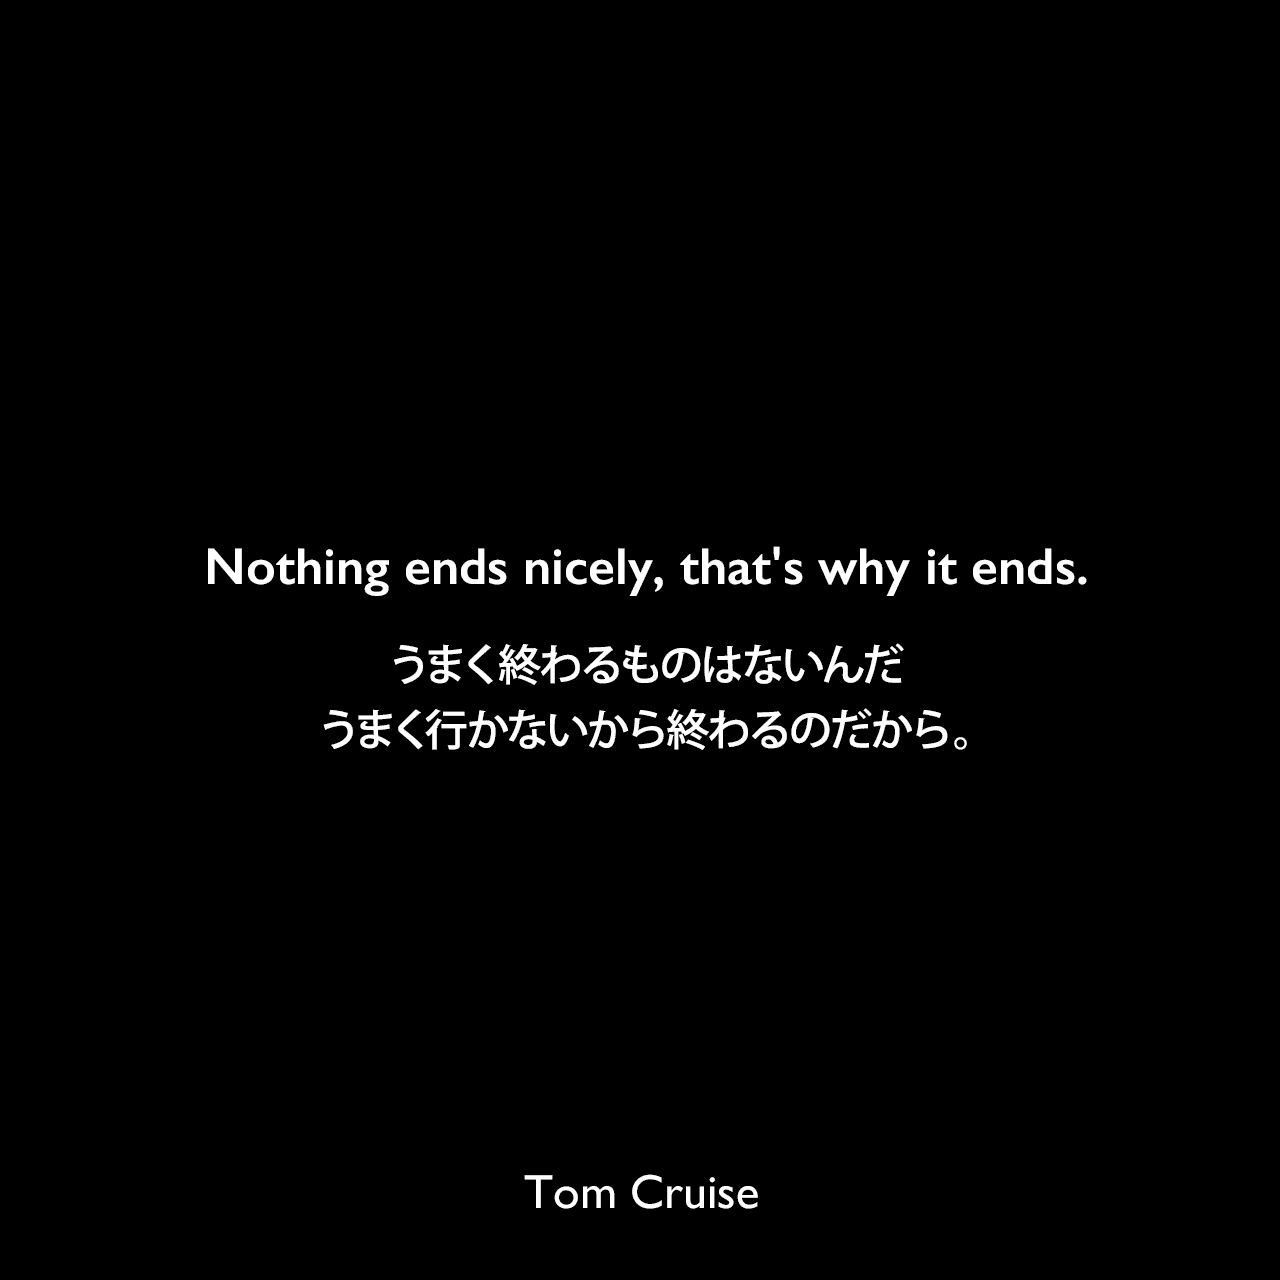 Nothing ends nicely, that's why it ends.うまく終わるものはないんだ、うまく行かないから終わるのだから。Tom Cruise